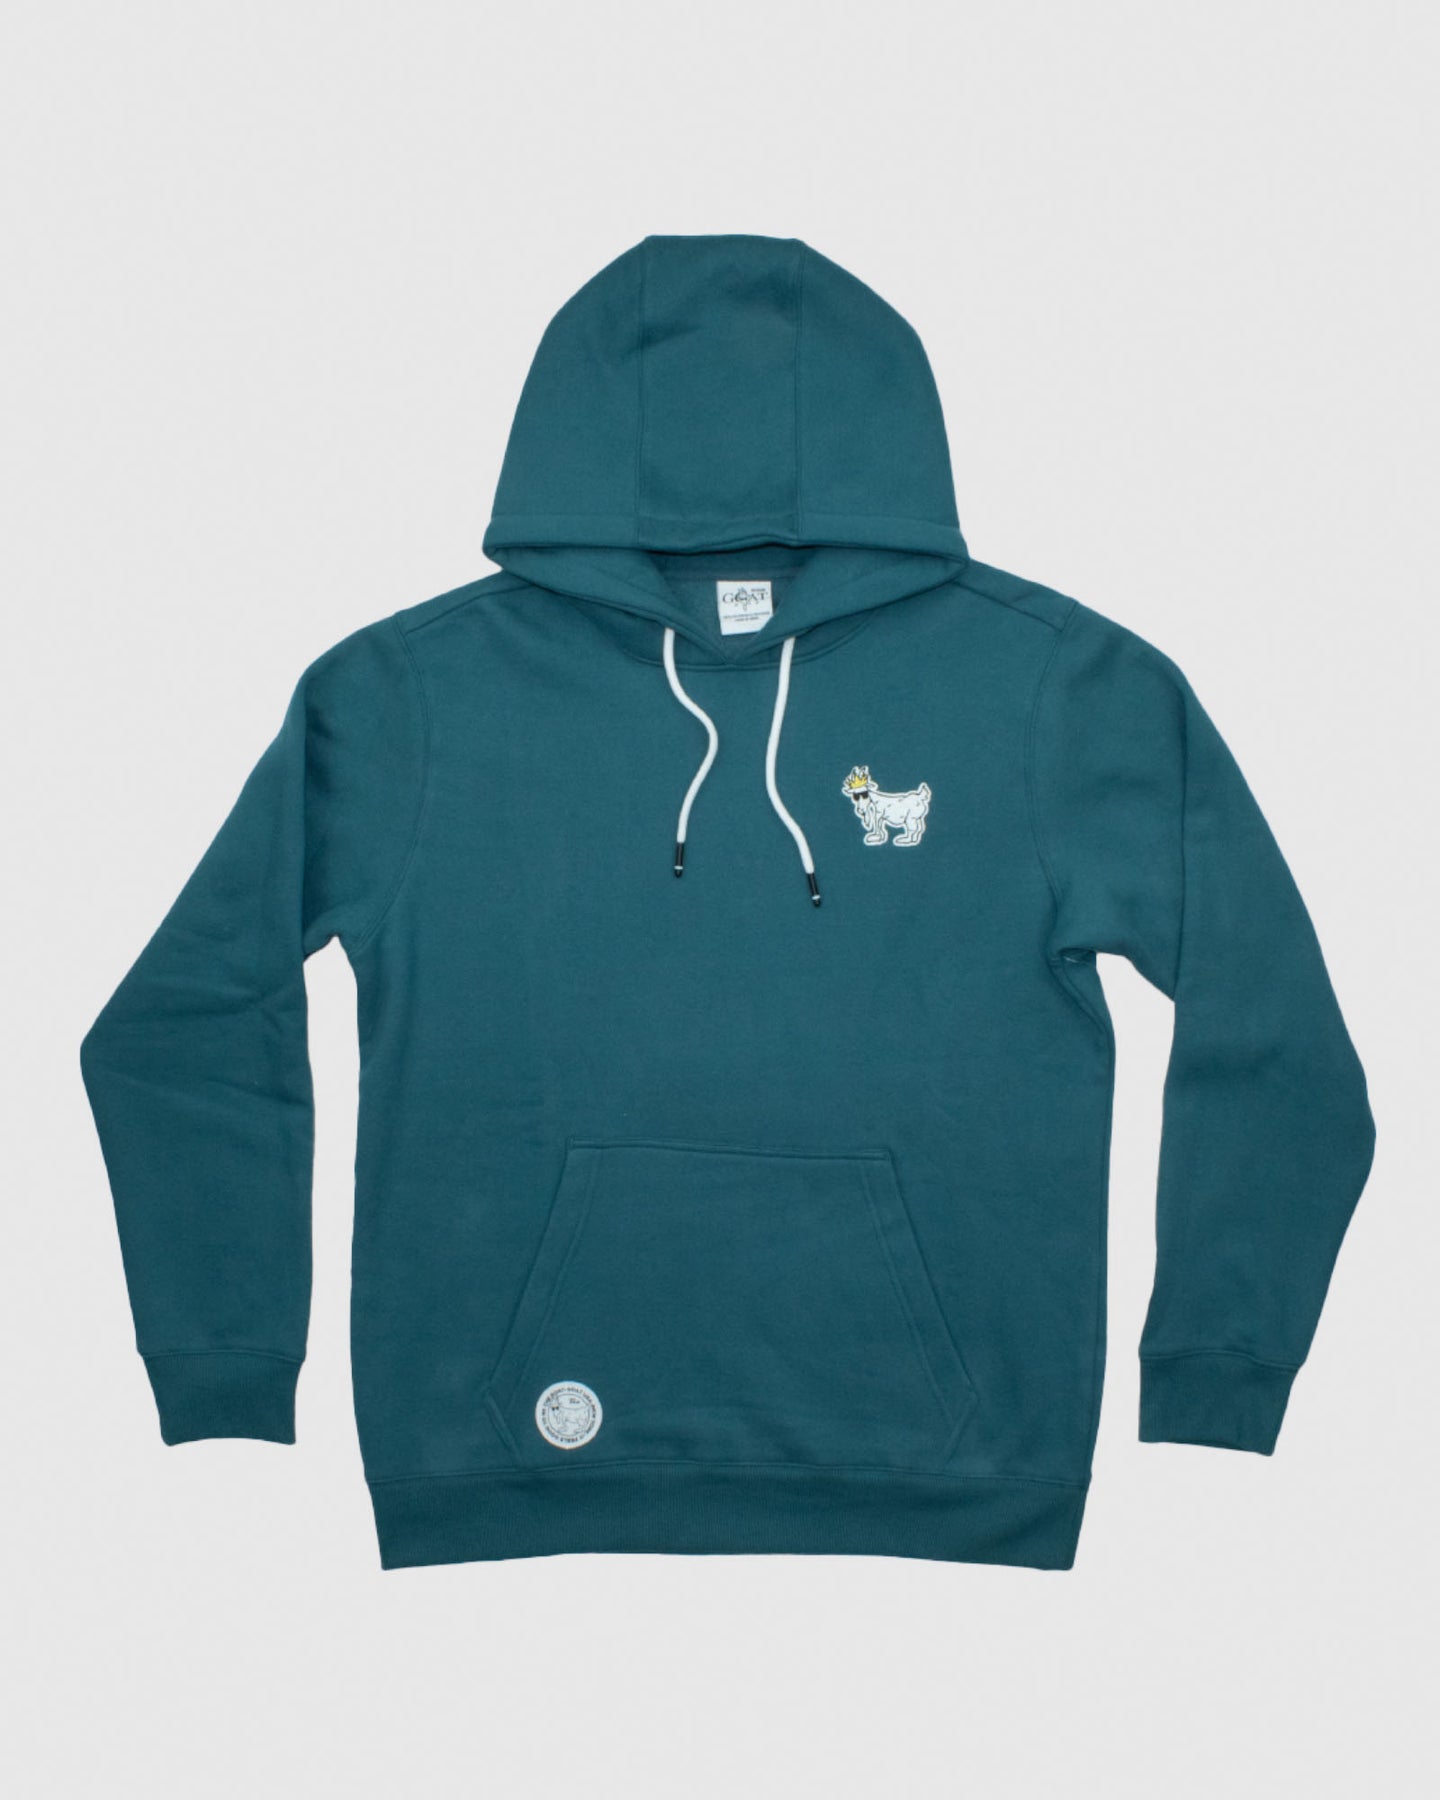 I am selling a YoungLa Goat hoodie size small, color mushroom